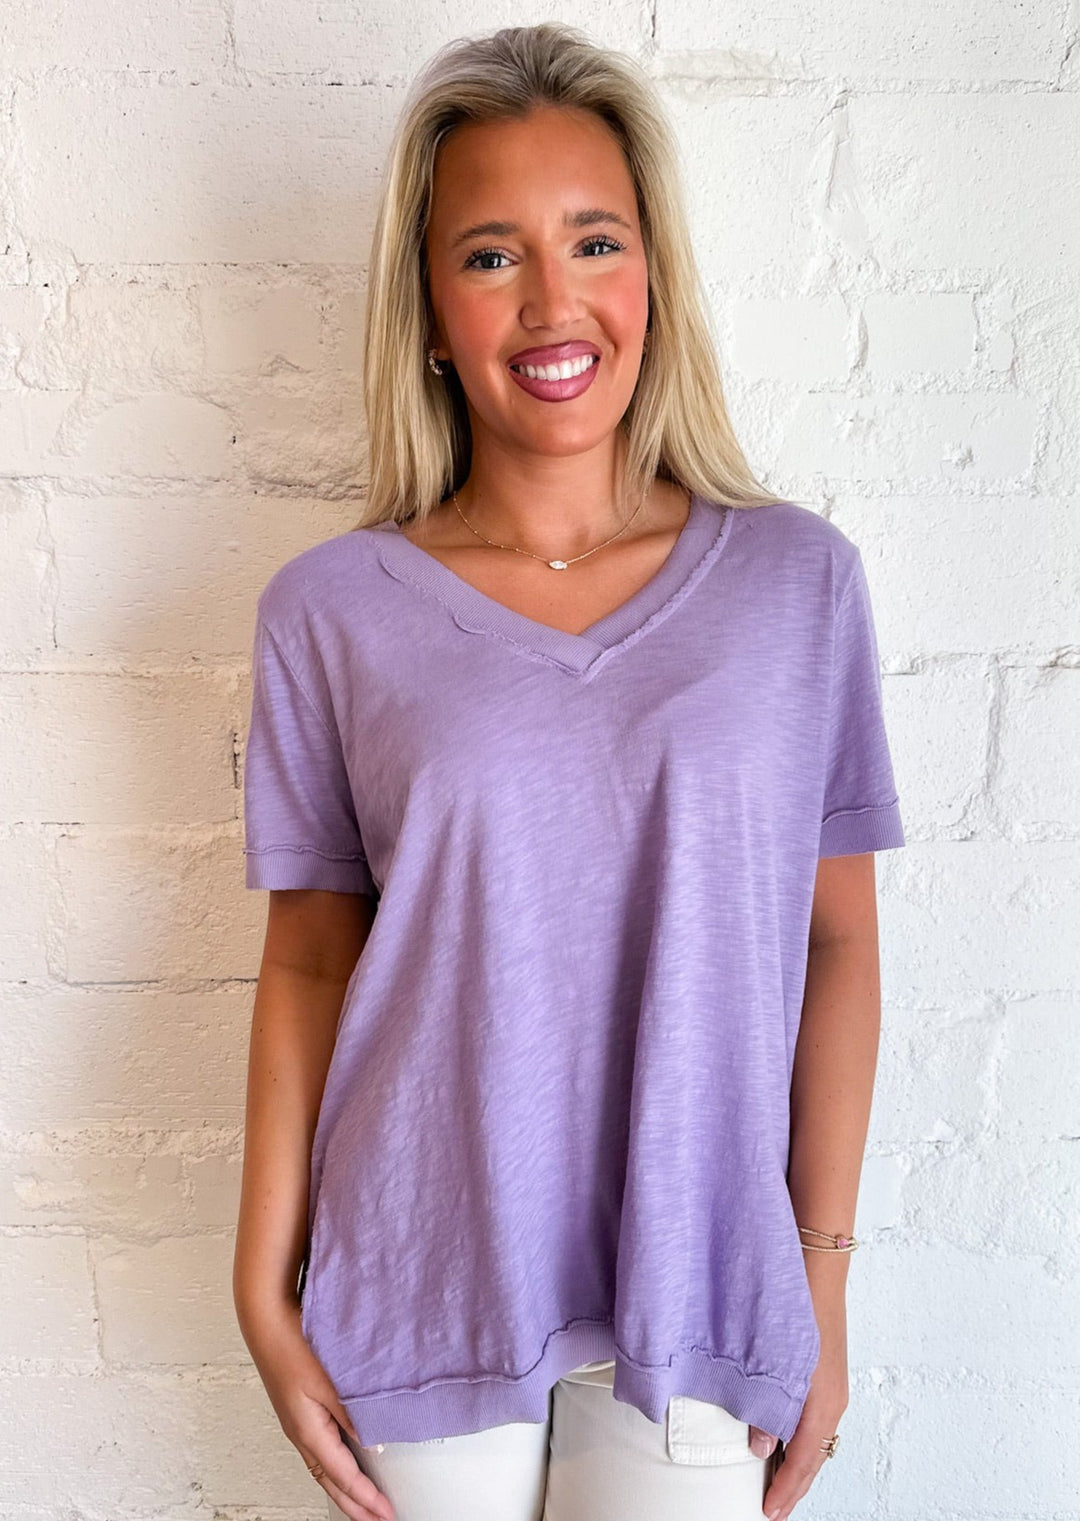 Blooming Lilac Knock Out V Neck Tee, Tops, Project Social T, Adeline, dallas boutique, dallas texas, texas boutique, women's boutique dallas, adeline boutique, dallas boutique, trendy boutique, affordable boutique